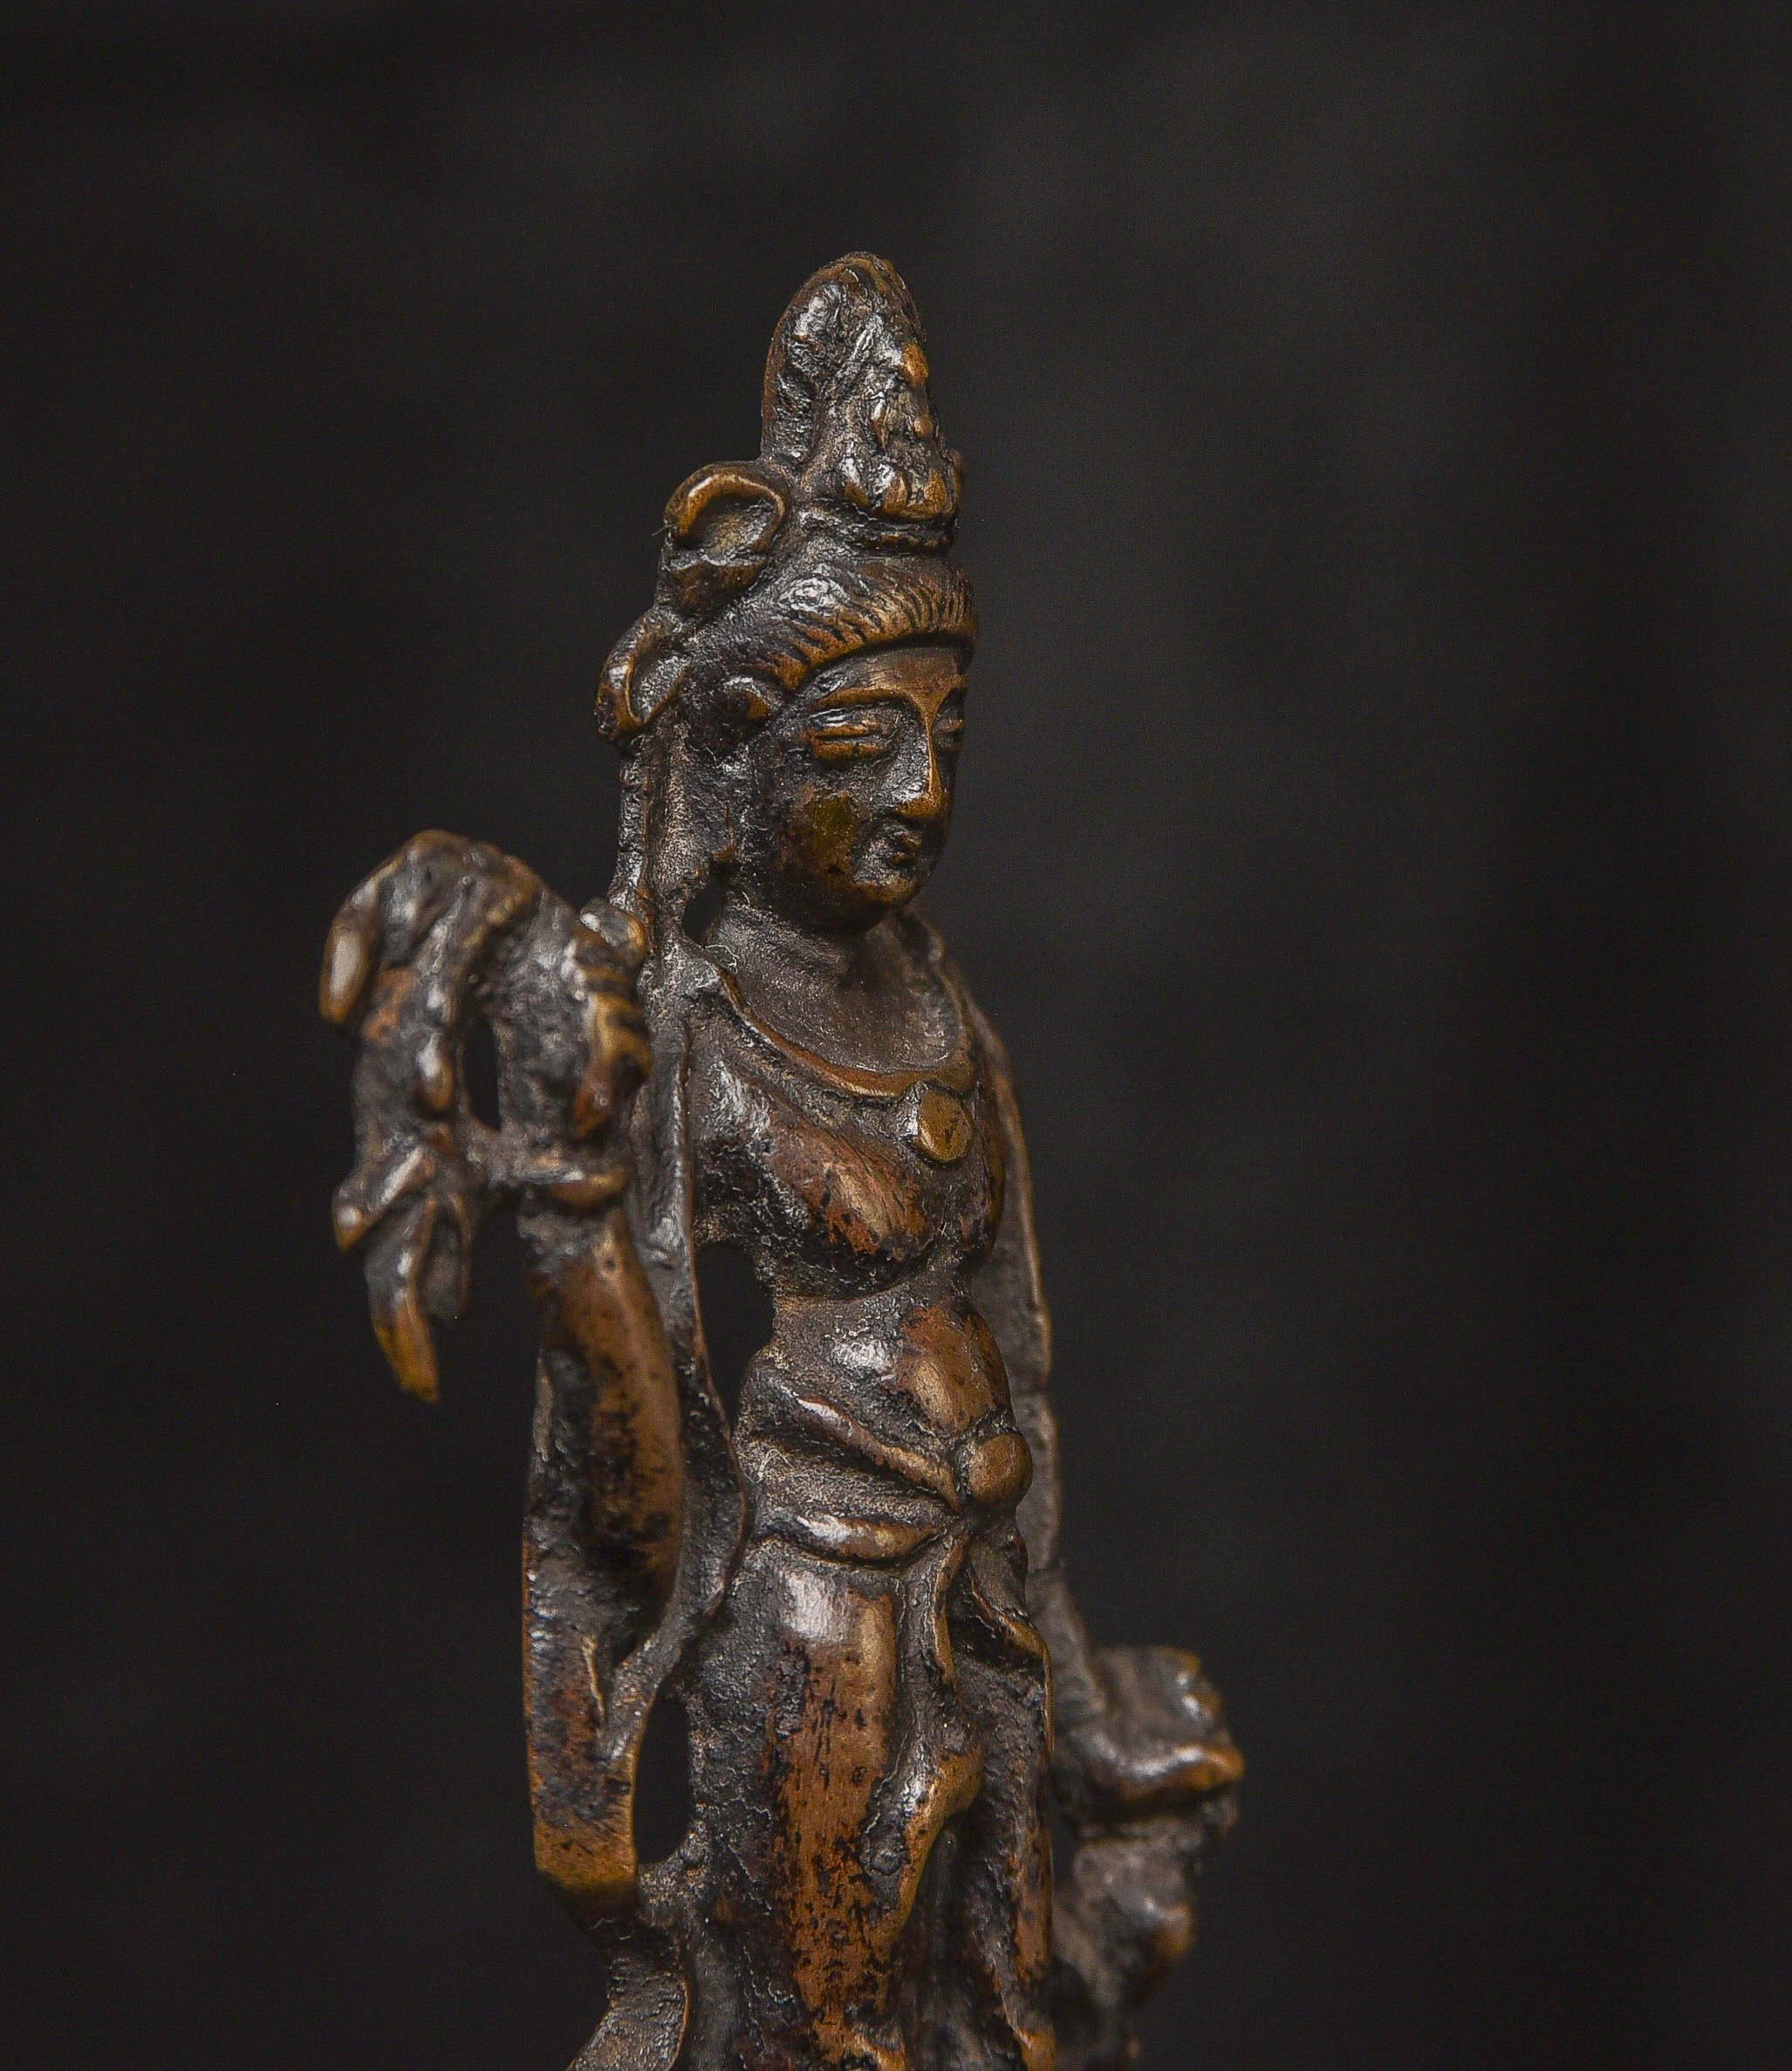  6-9th C Chinese Bronze Bodhisattva of Compassion from the Tang Dynasty - 9685 For Sale 5